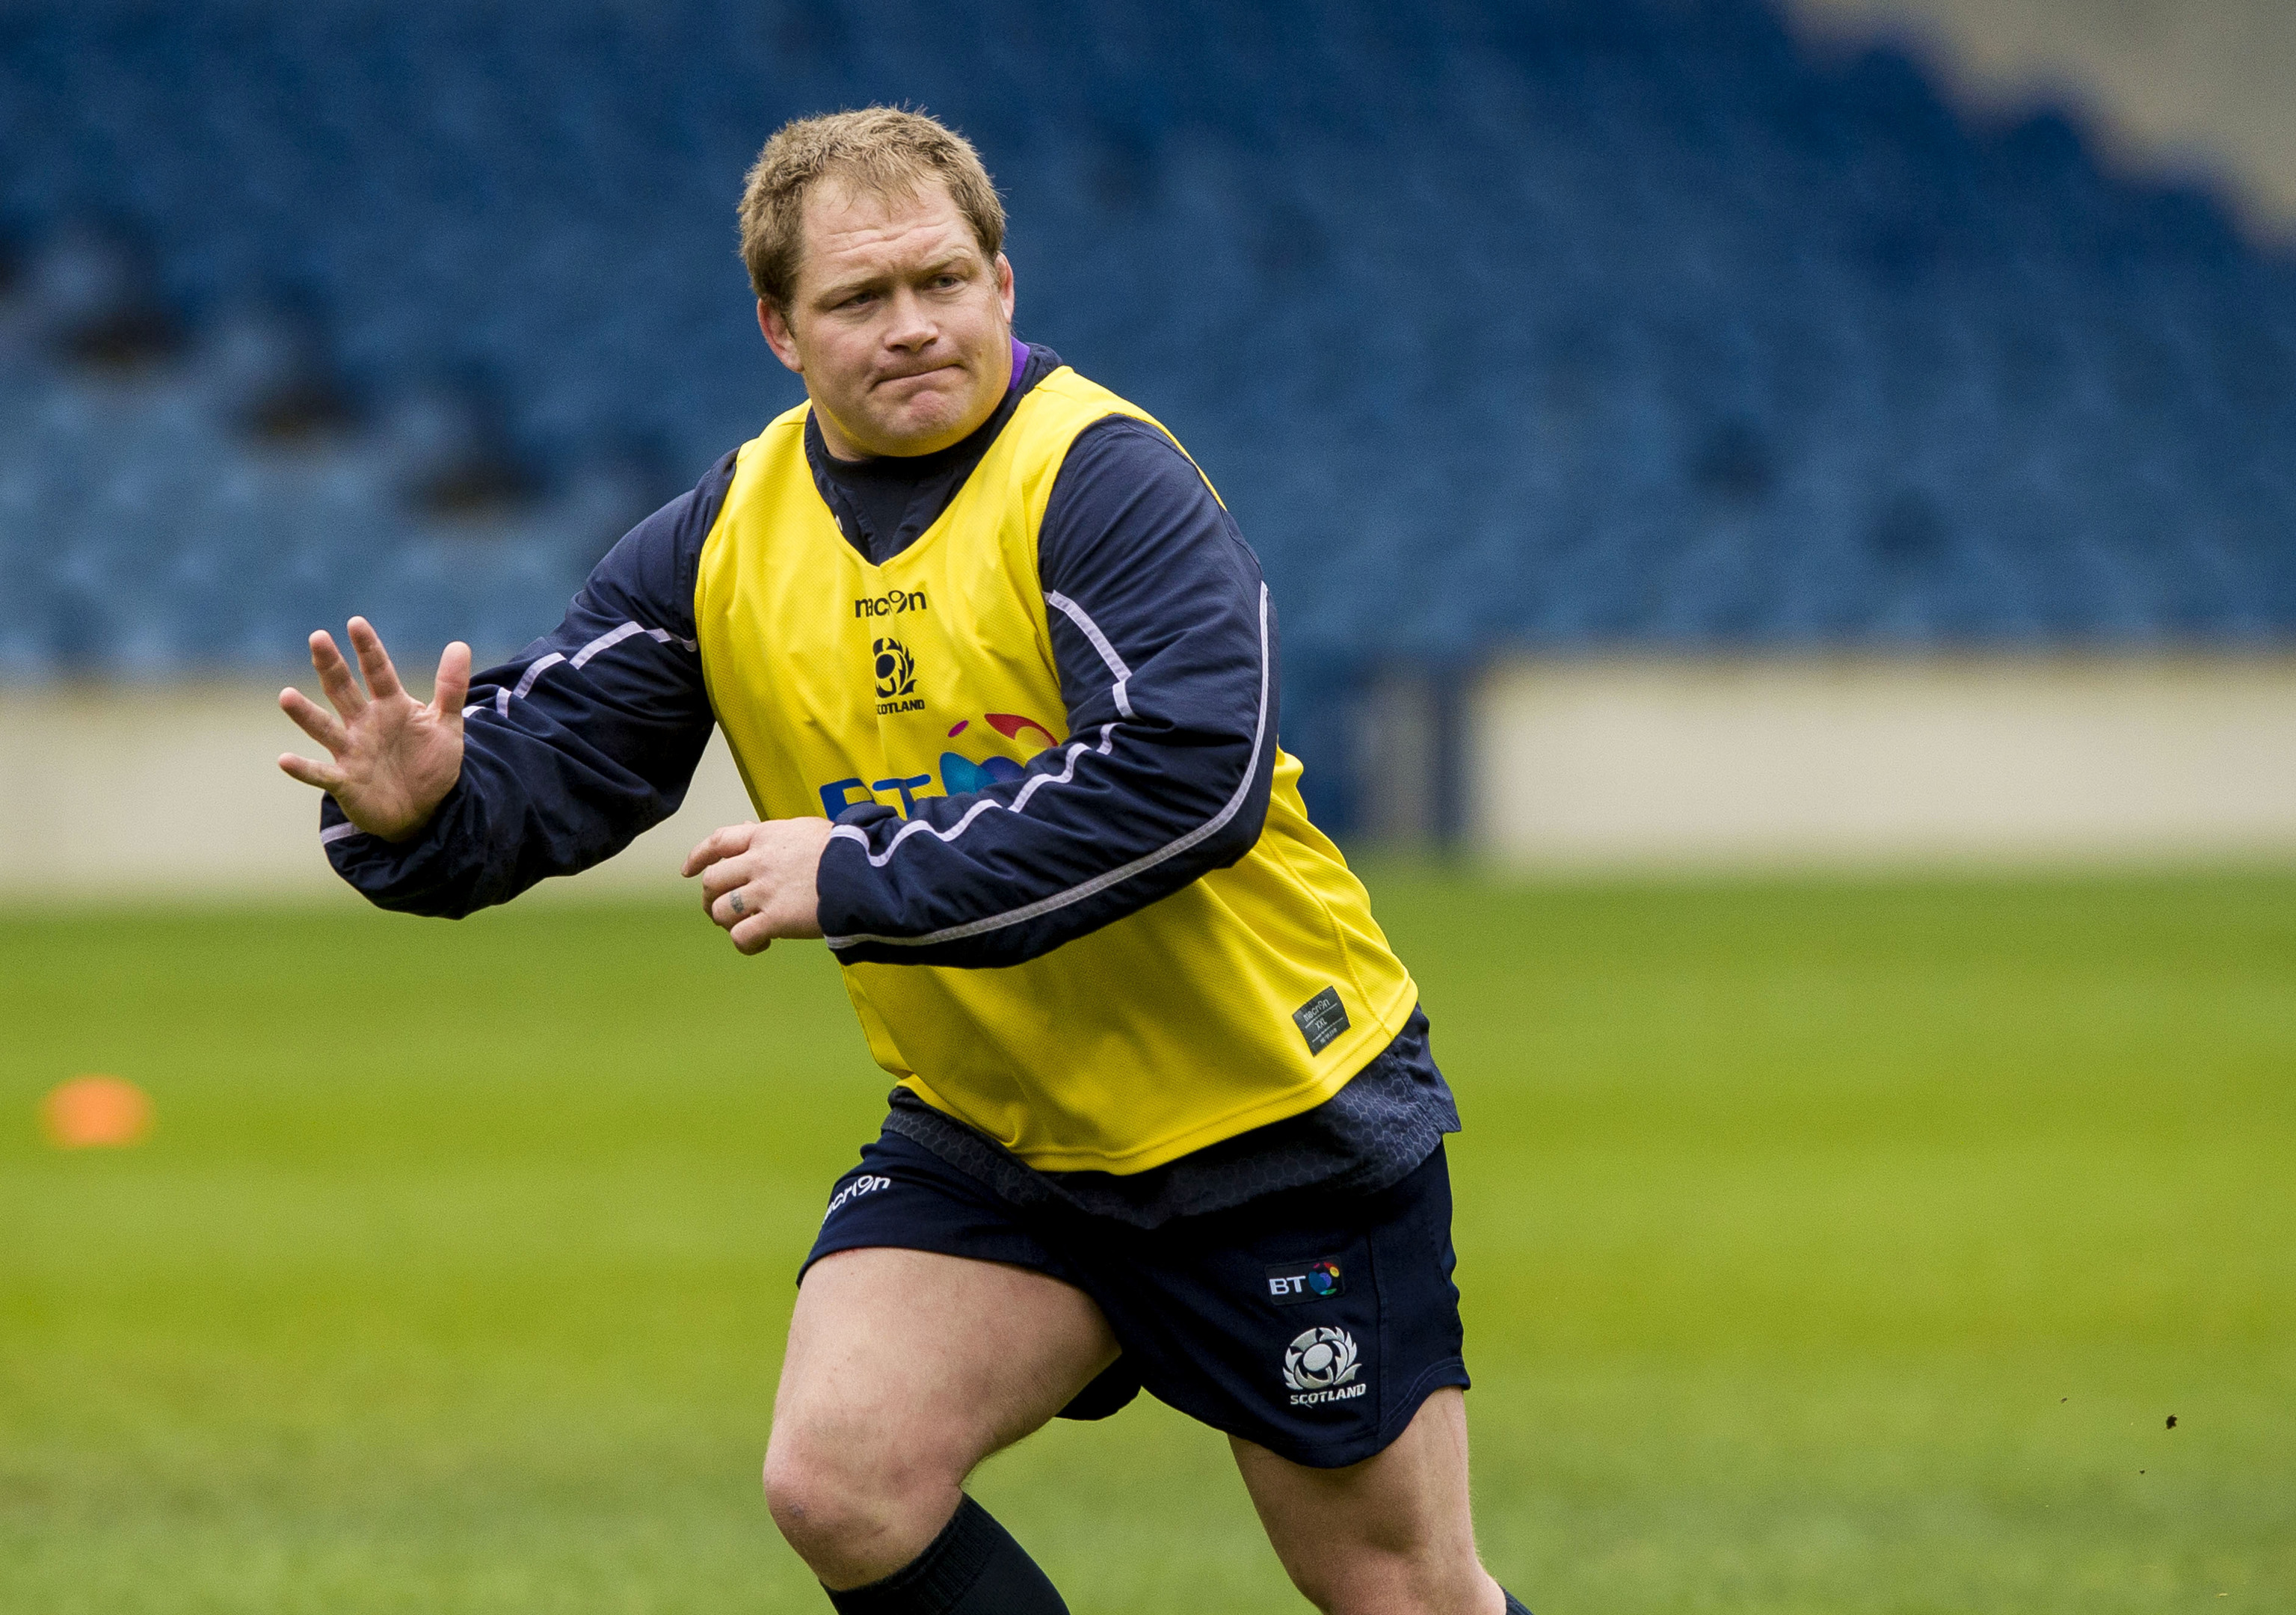 Scotland's fortunes have revived since WP Nel came into the team in the summer of 2015.